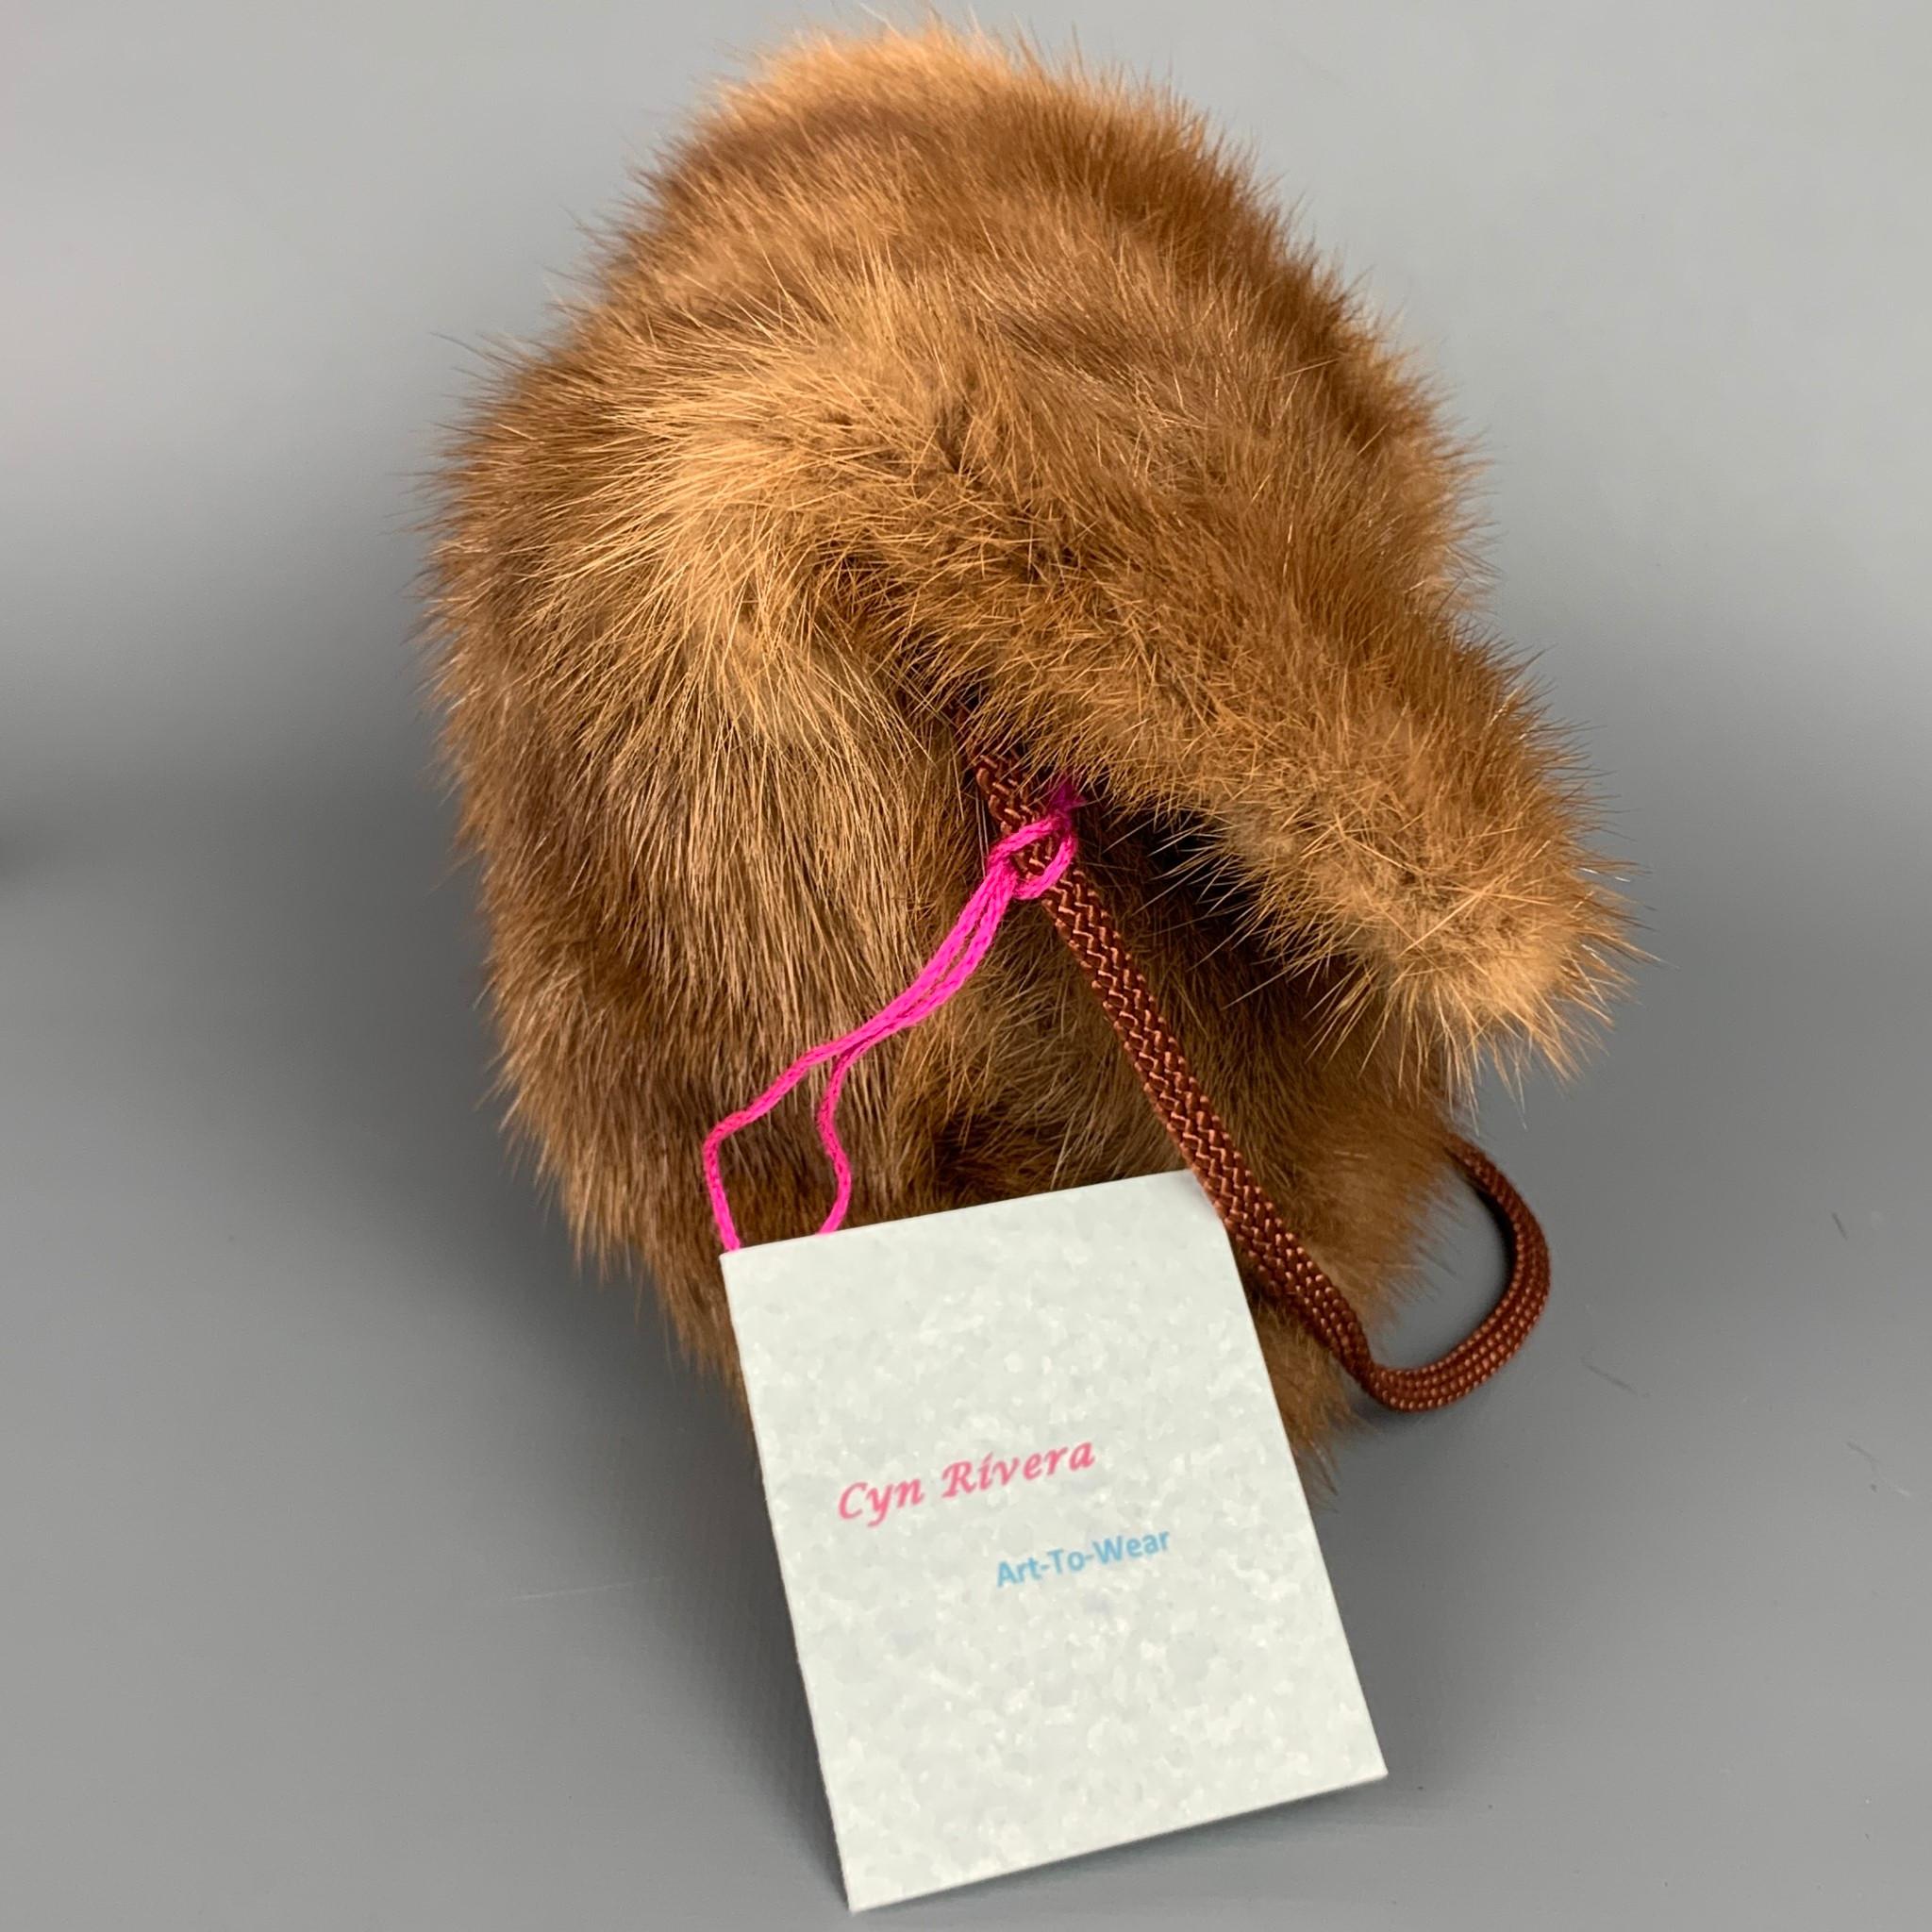 CYN RIVERA handbag comes in a tan mink fur with a floral liner featuring a shoulder strap, inner pocket, and a single button closure. Handmade. 

New With Tags.
Original Retail Price: $250.0

Measurements:

Length: 8.5 in.
Width: 1 in.
Height: 6.5